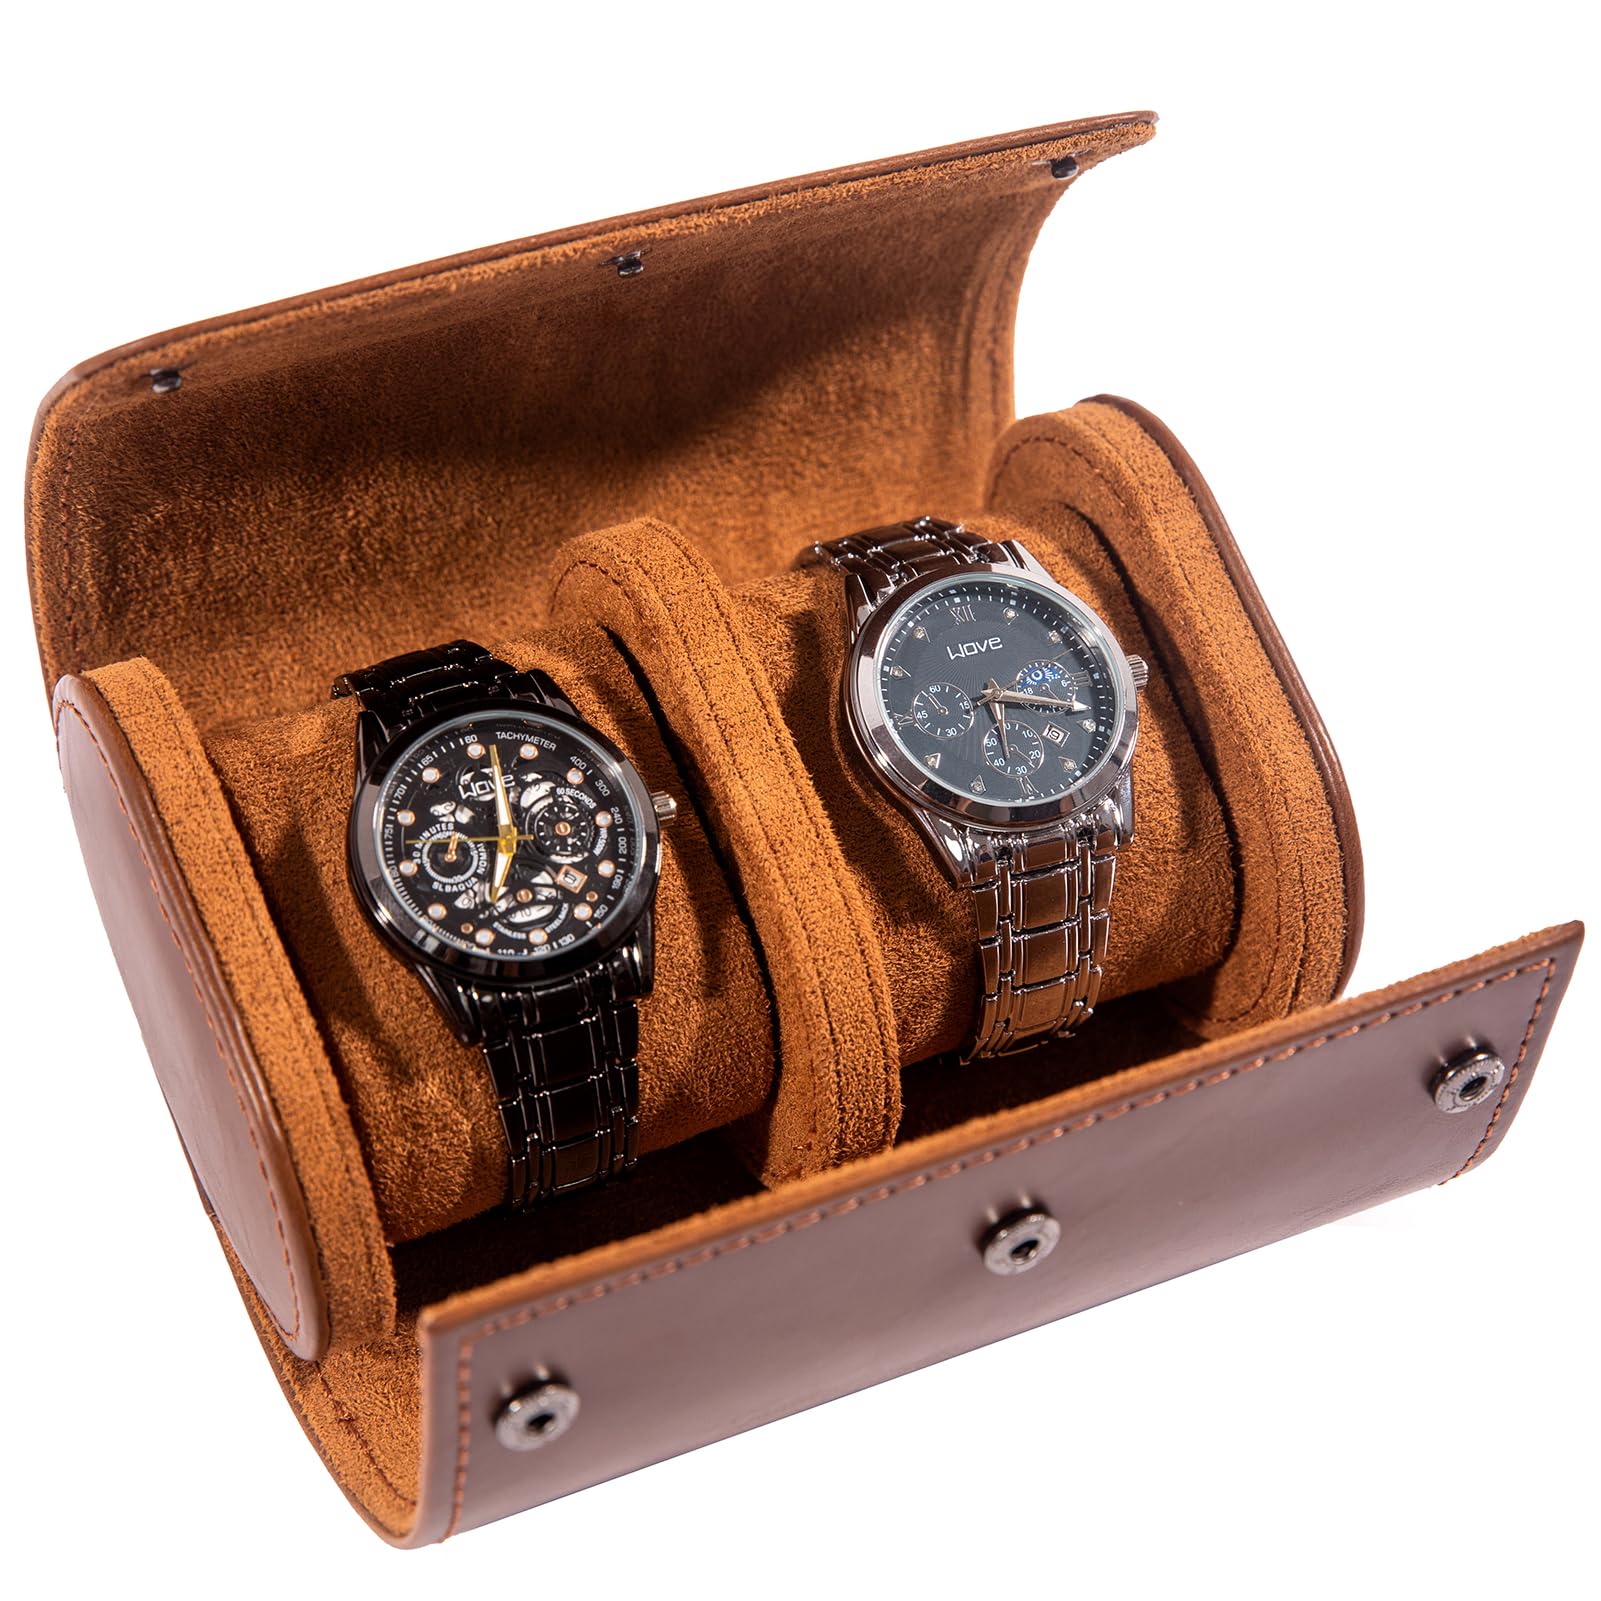 Mr.Okay 2 Watch Travel Case -Premium Leather Watch Case With Perfect Texture.(Watch Carrying Case Or Organizer For Storage And Display). Mens Watch Case for Travel Handcrafted by Craftsmen.